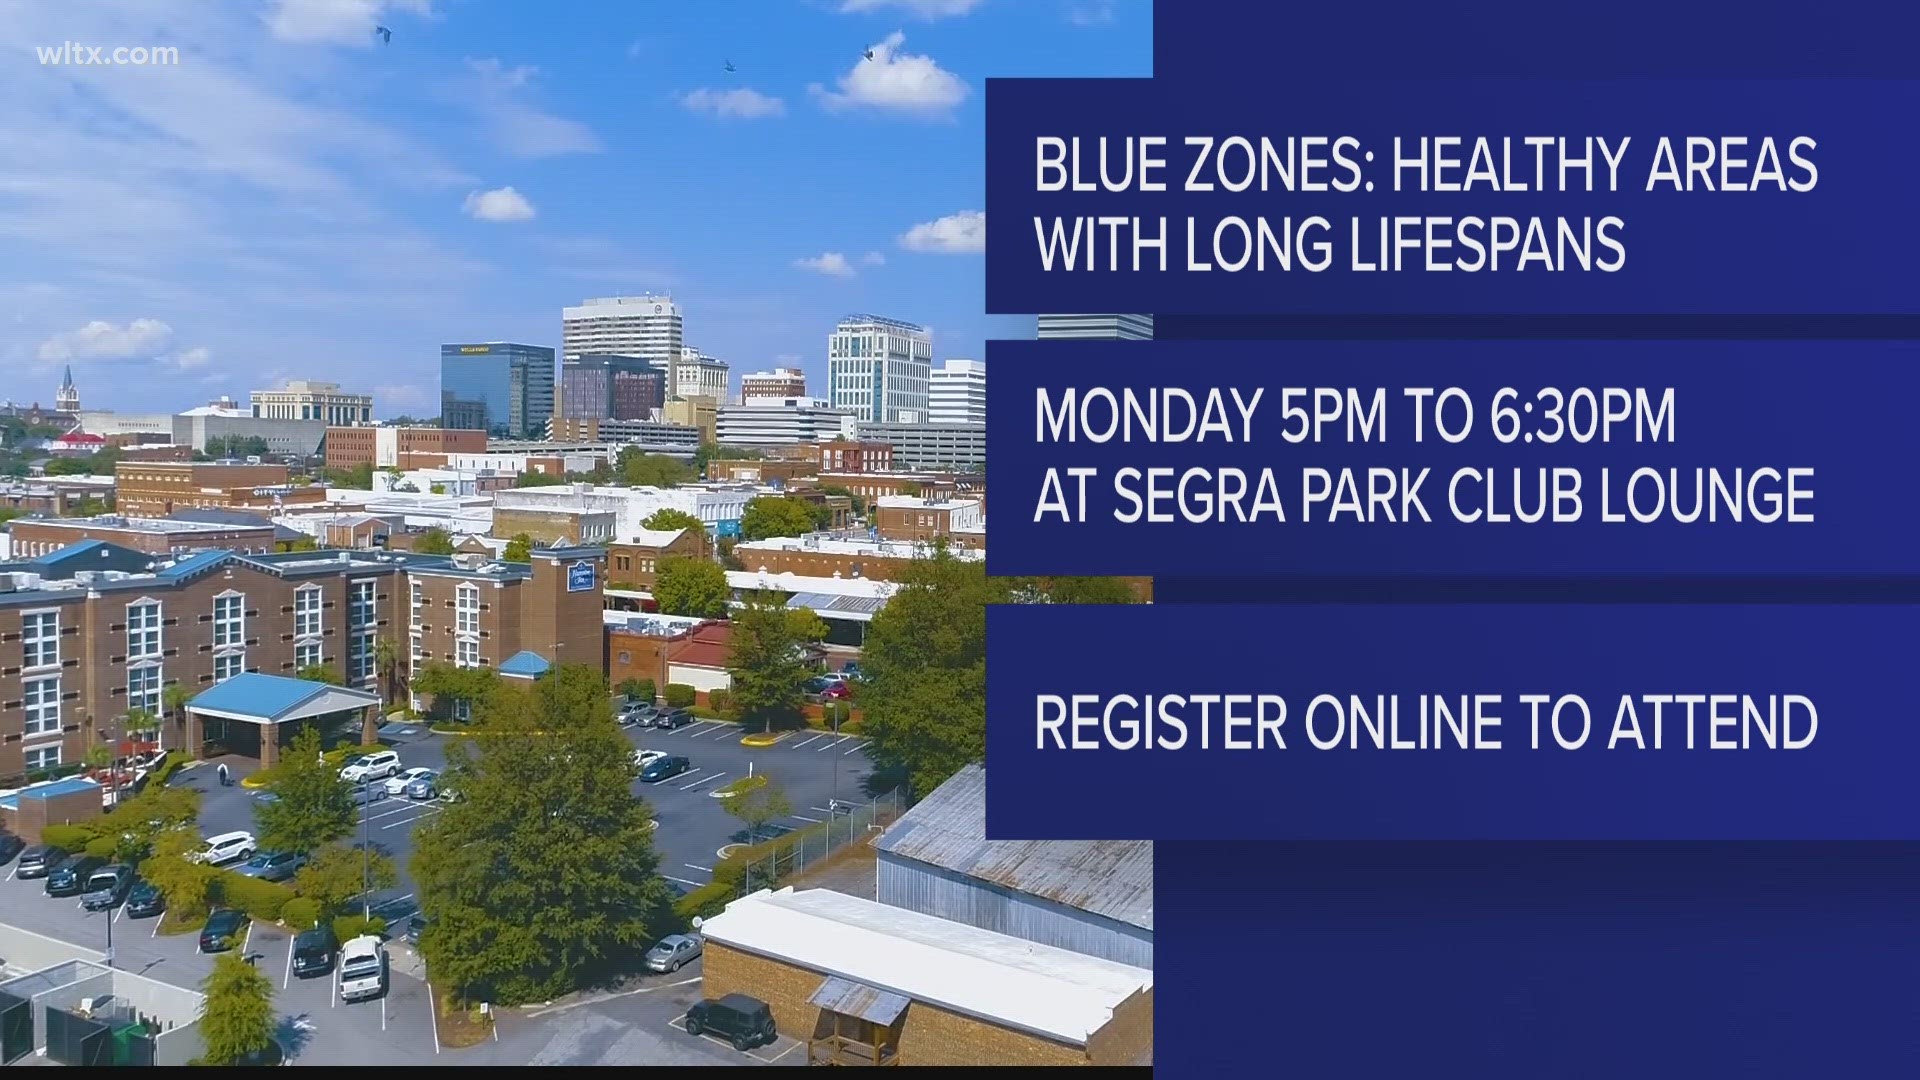 Blue Zones are areas where life expectancy is high, and the community is healthy. The April 1 public forum will explore how Columbia might become a Blue Zone.